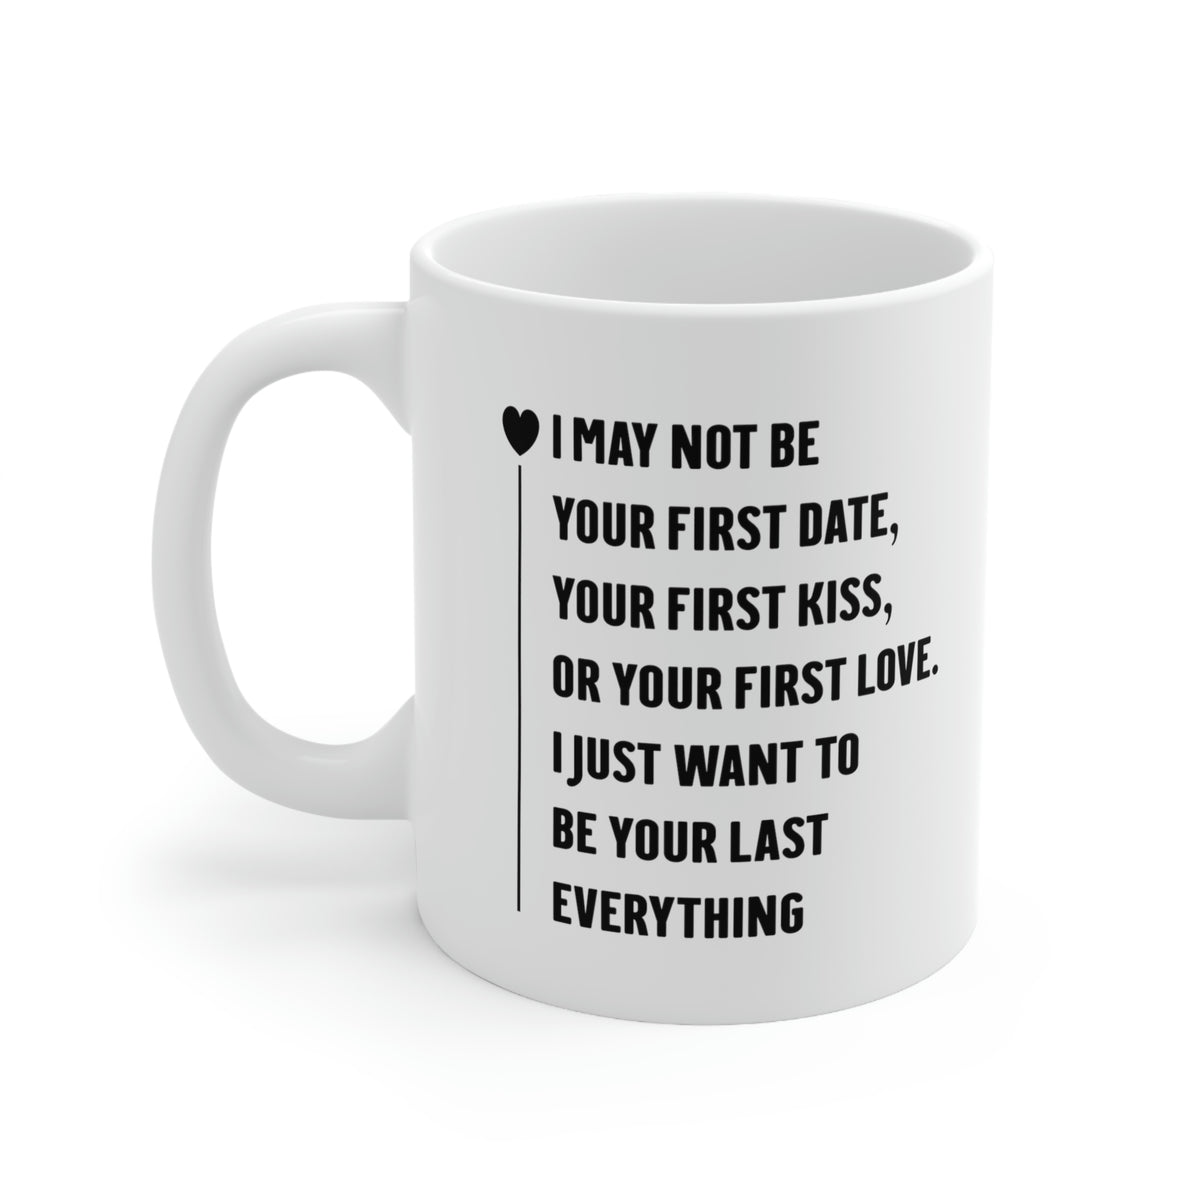 Valentine's Day Love Coffee Mug - I May Not Be Your First Date - Funny Gifts For Men Women